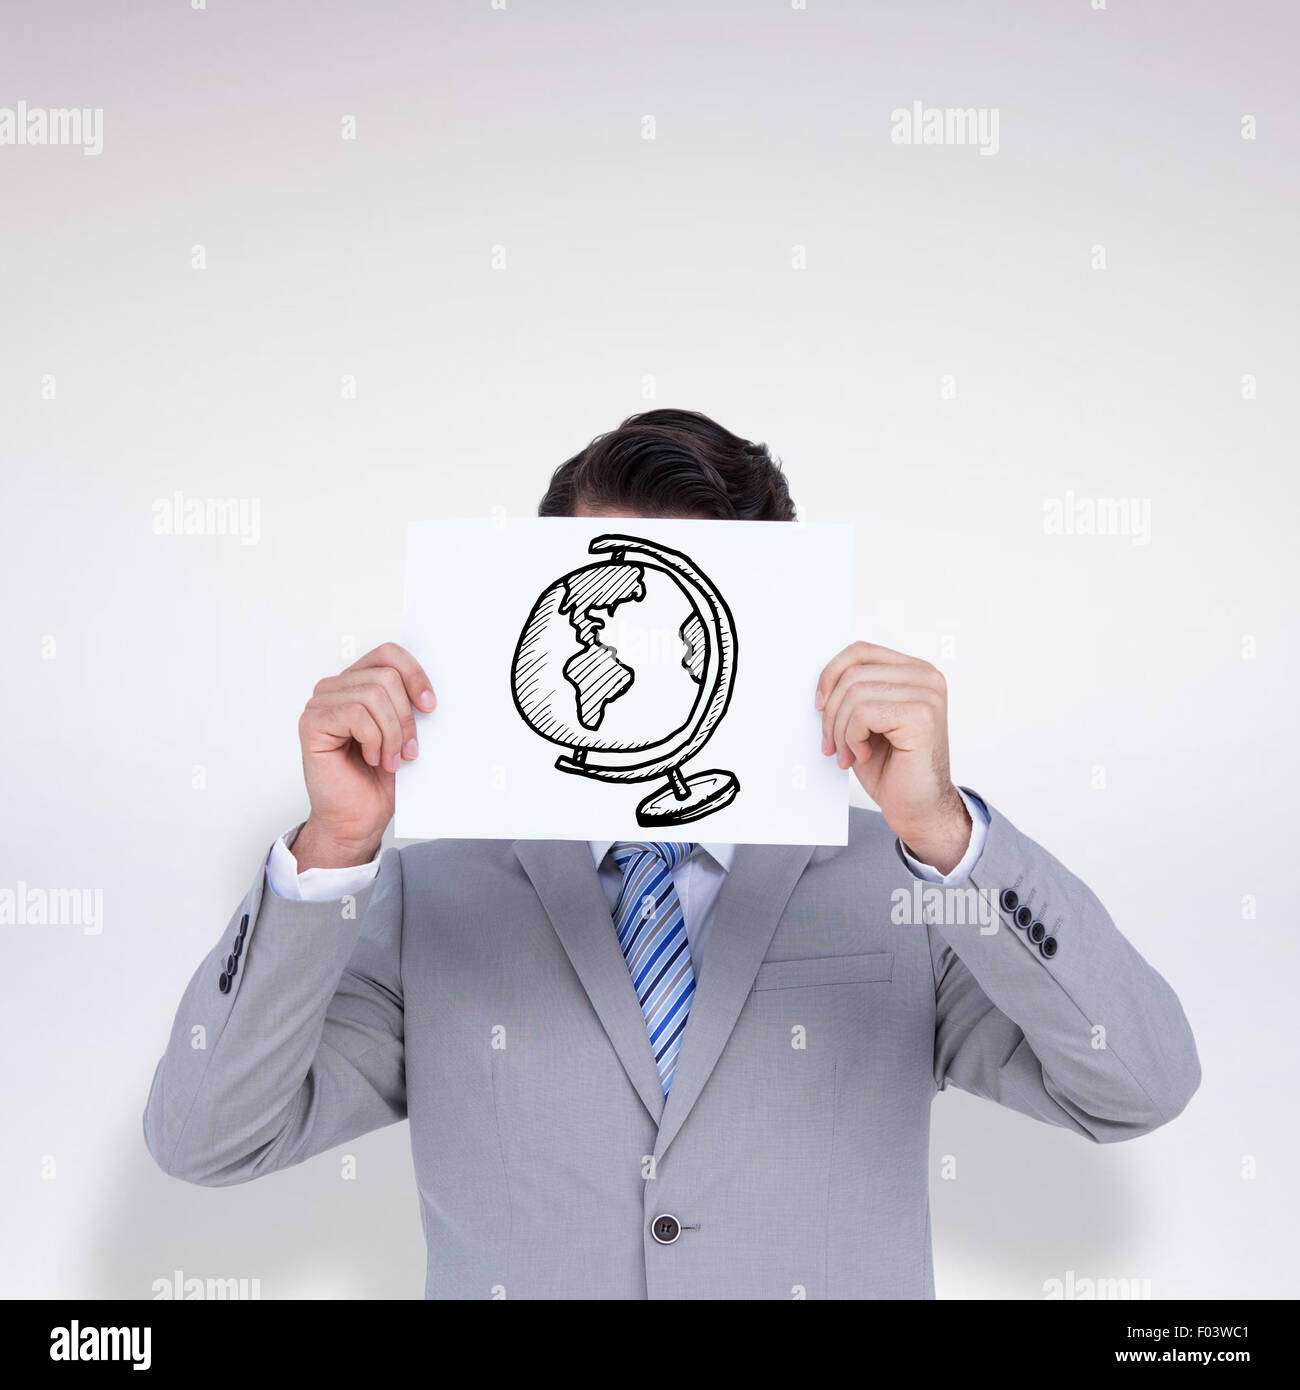 Composite image of businessman holding blank sign in front of his head Stock Photo